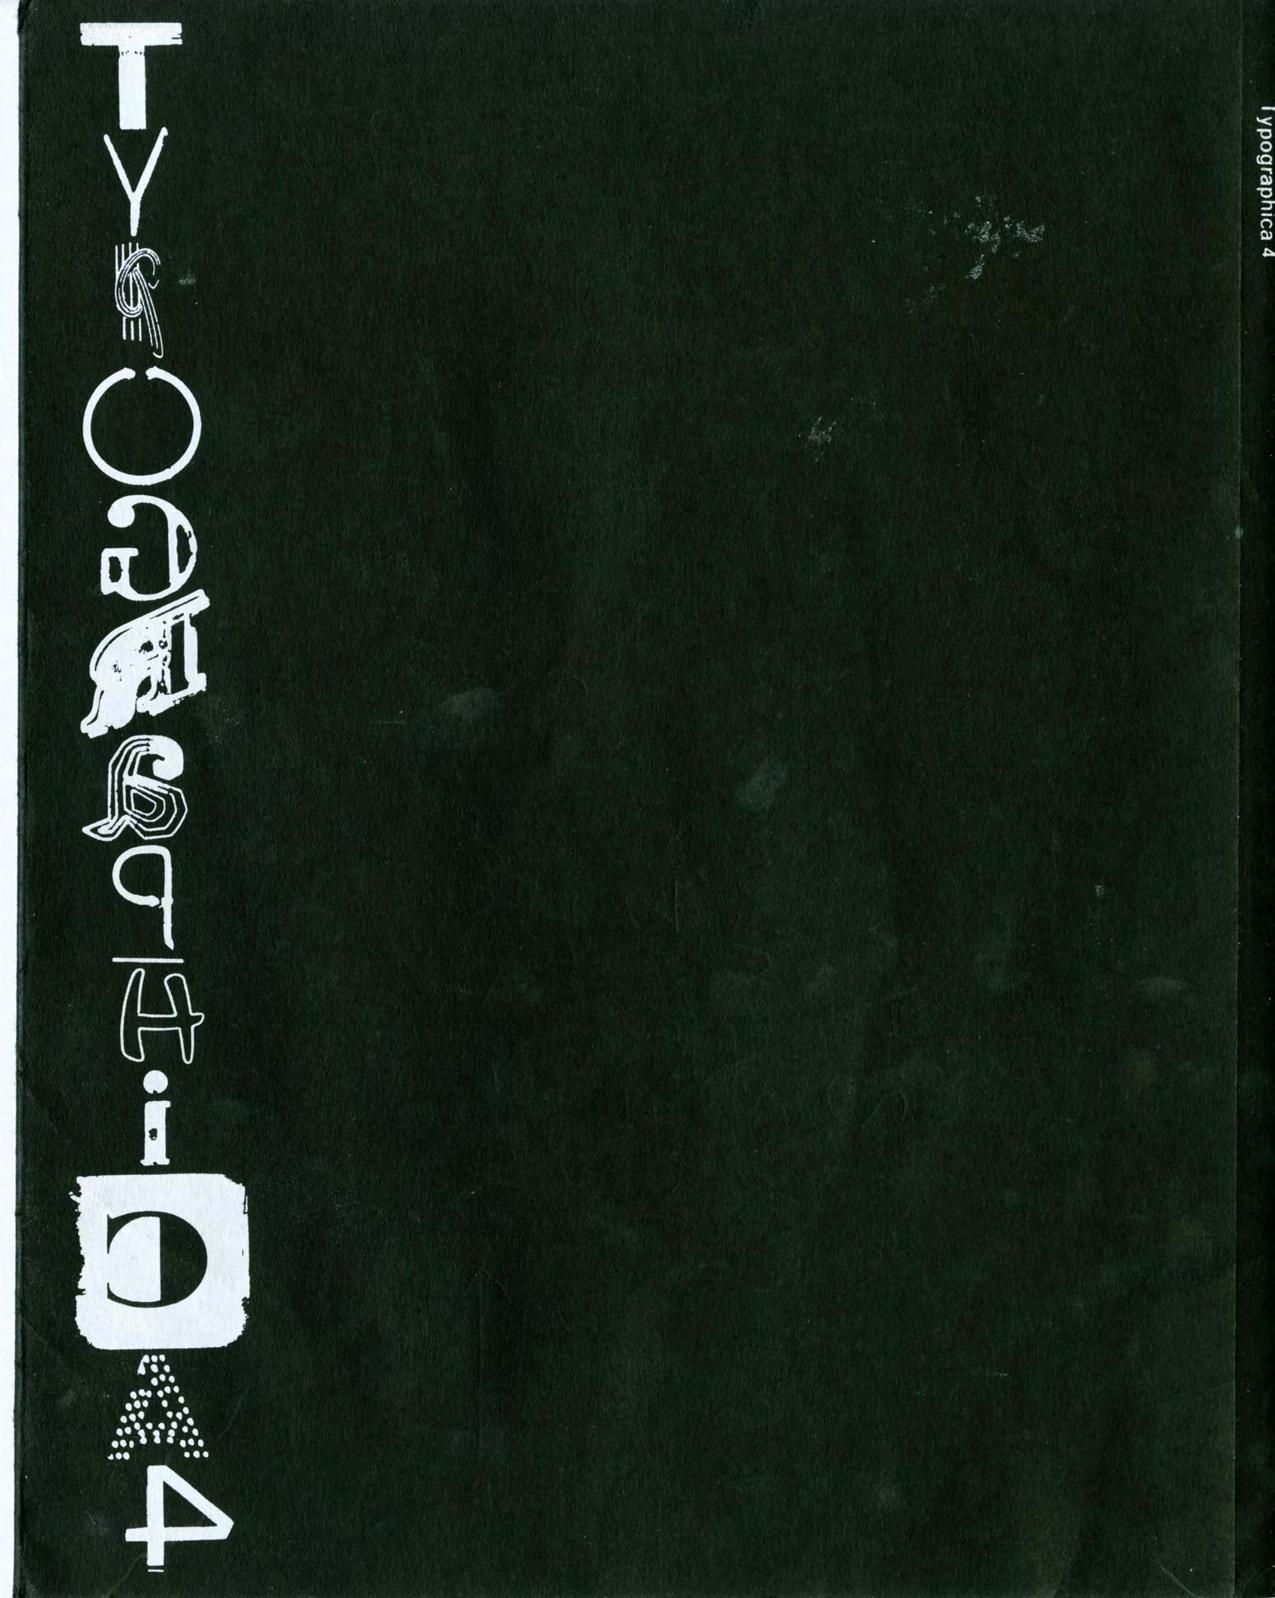 Typographica 4 back cover by BJ
London 1962